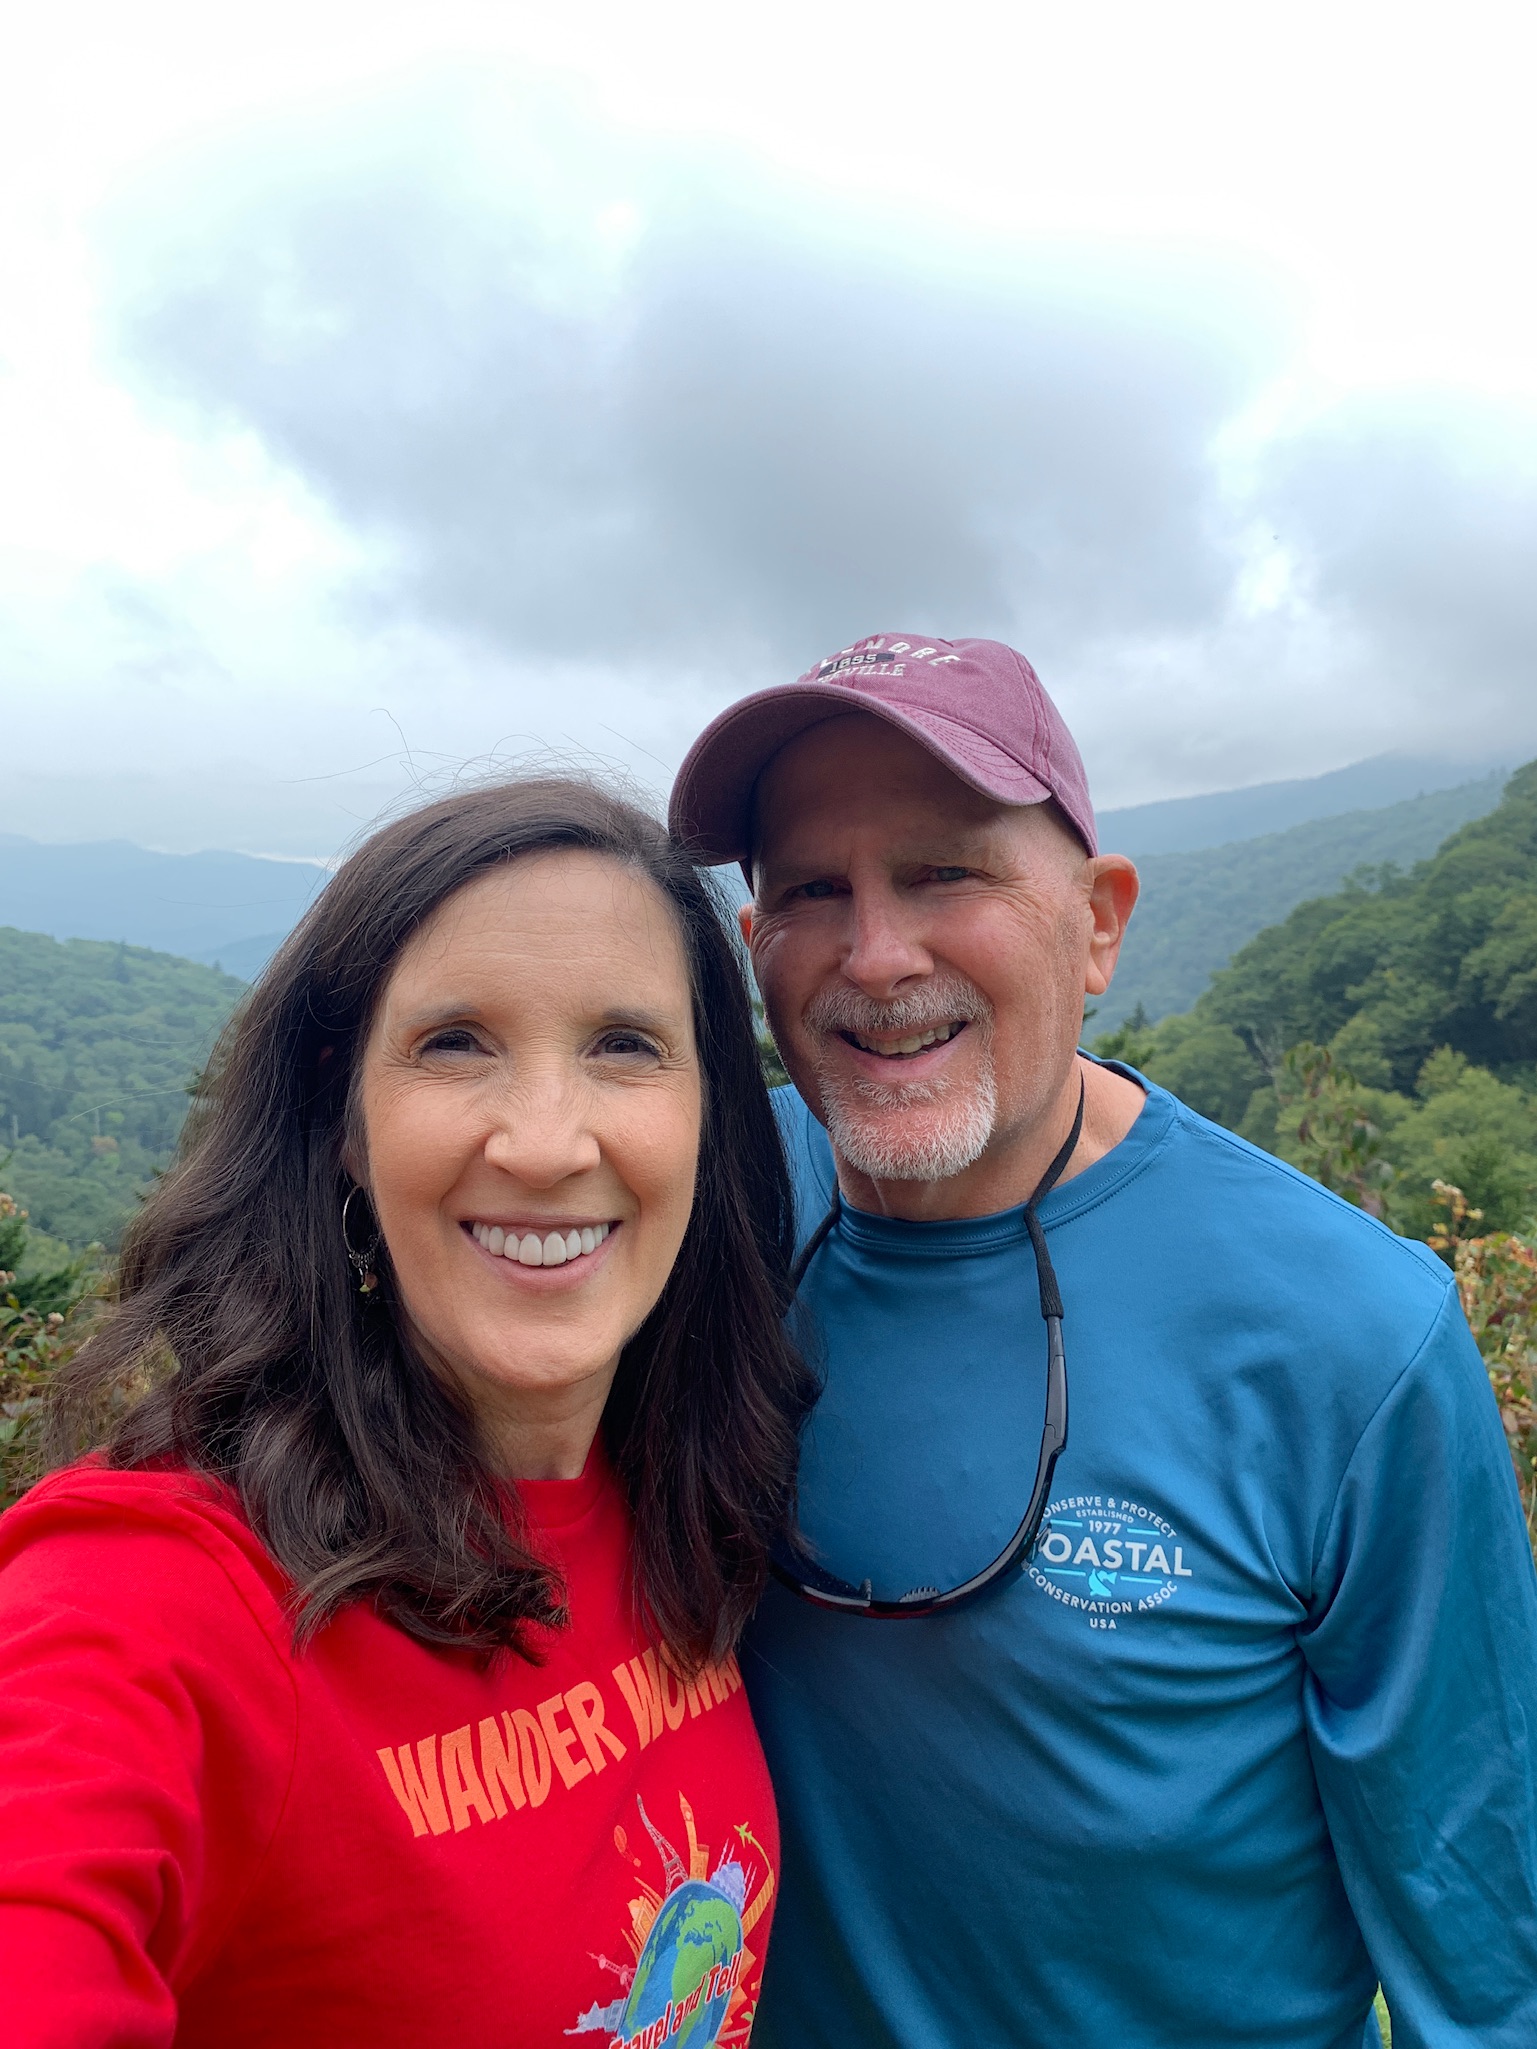 Ready to Wander at Great Smoky Mountains National Park